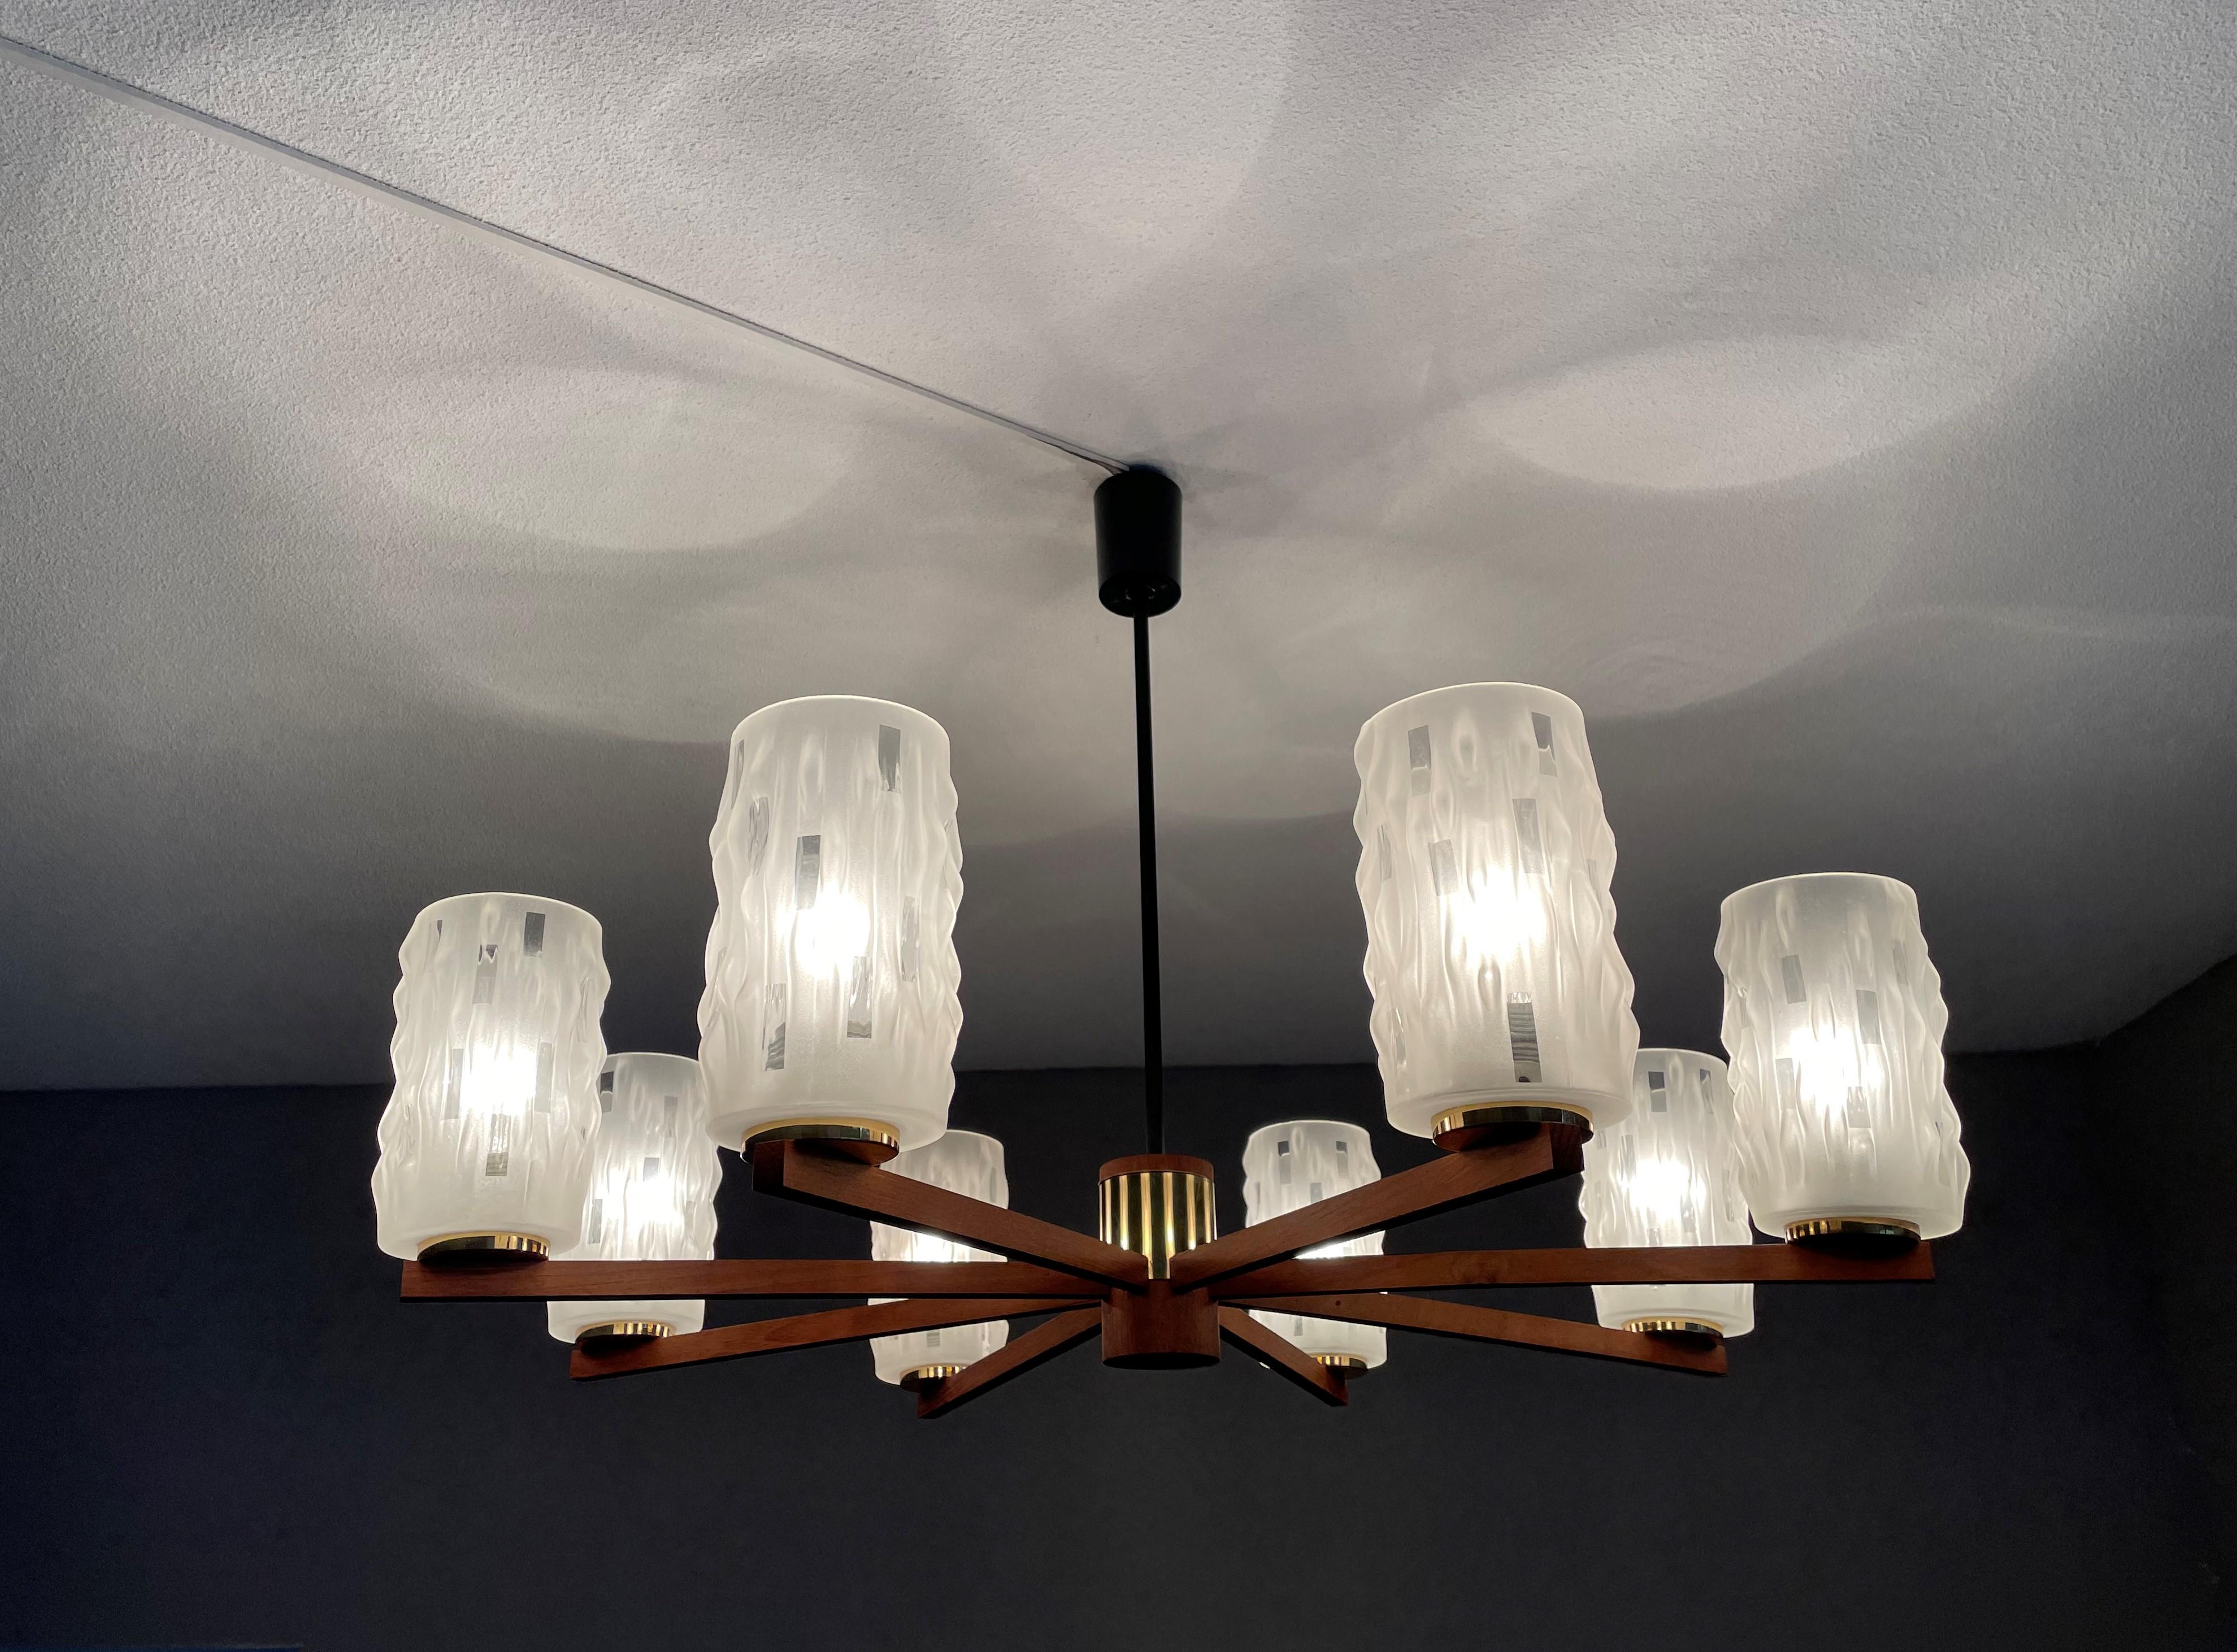 Beautiful and stylish pendant light from the heydays of the Scandinavian Design era. 

If you are looking for a rare and stylish chandelier to complement your midcentury or your contemporary interior then this handcrafted Scandinavian light